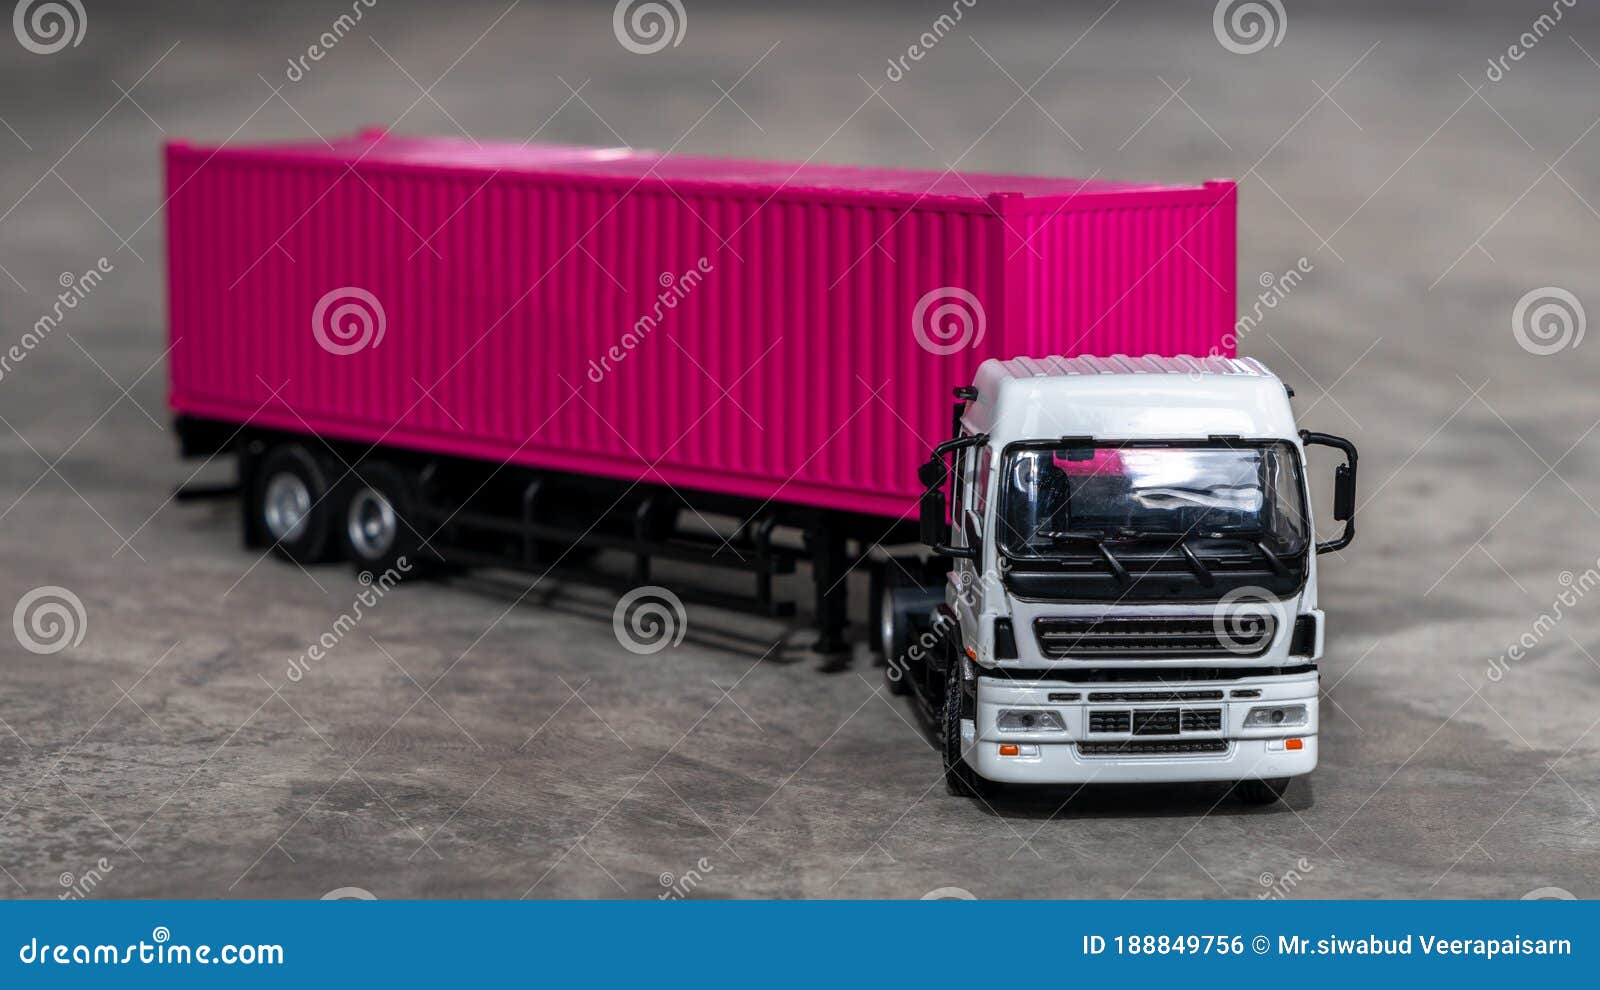 https://thumbs.dreamstime.com/z/semi-trailer-truck-lorry-cargo-vehicle-blue-background-view-above-aerial-top-white-pink-container-188849756.jpg